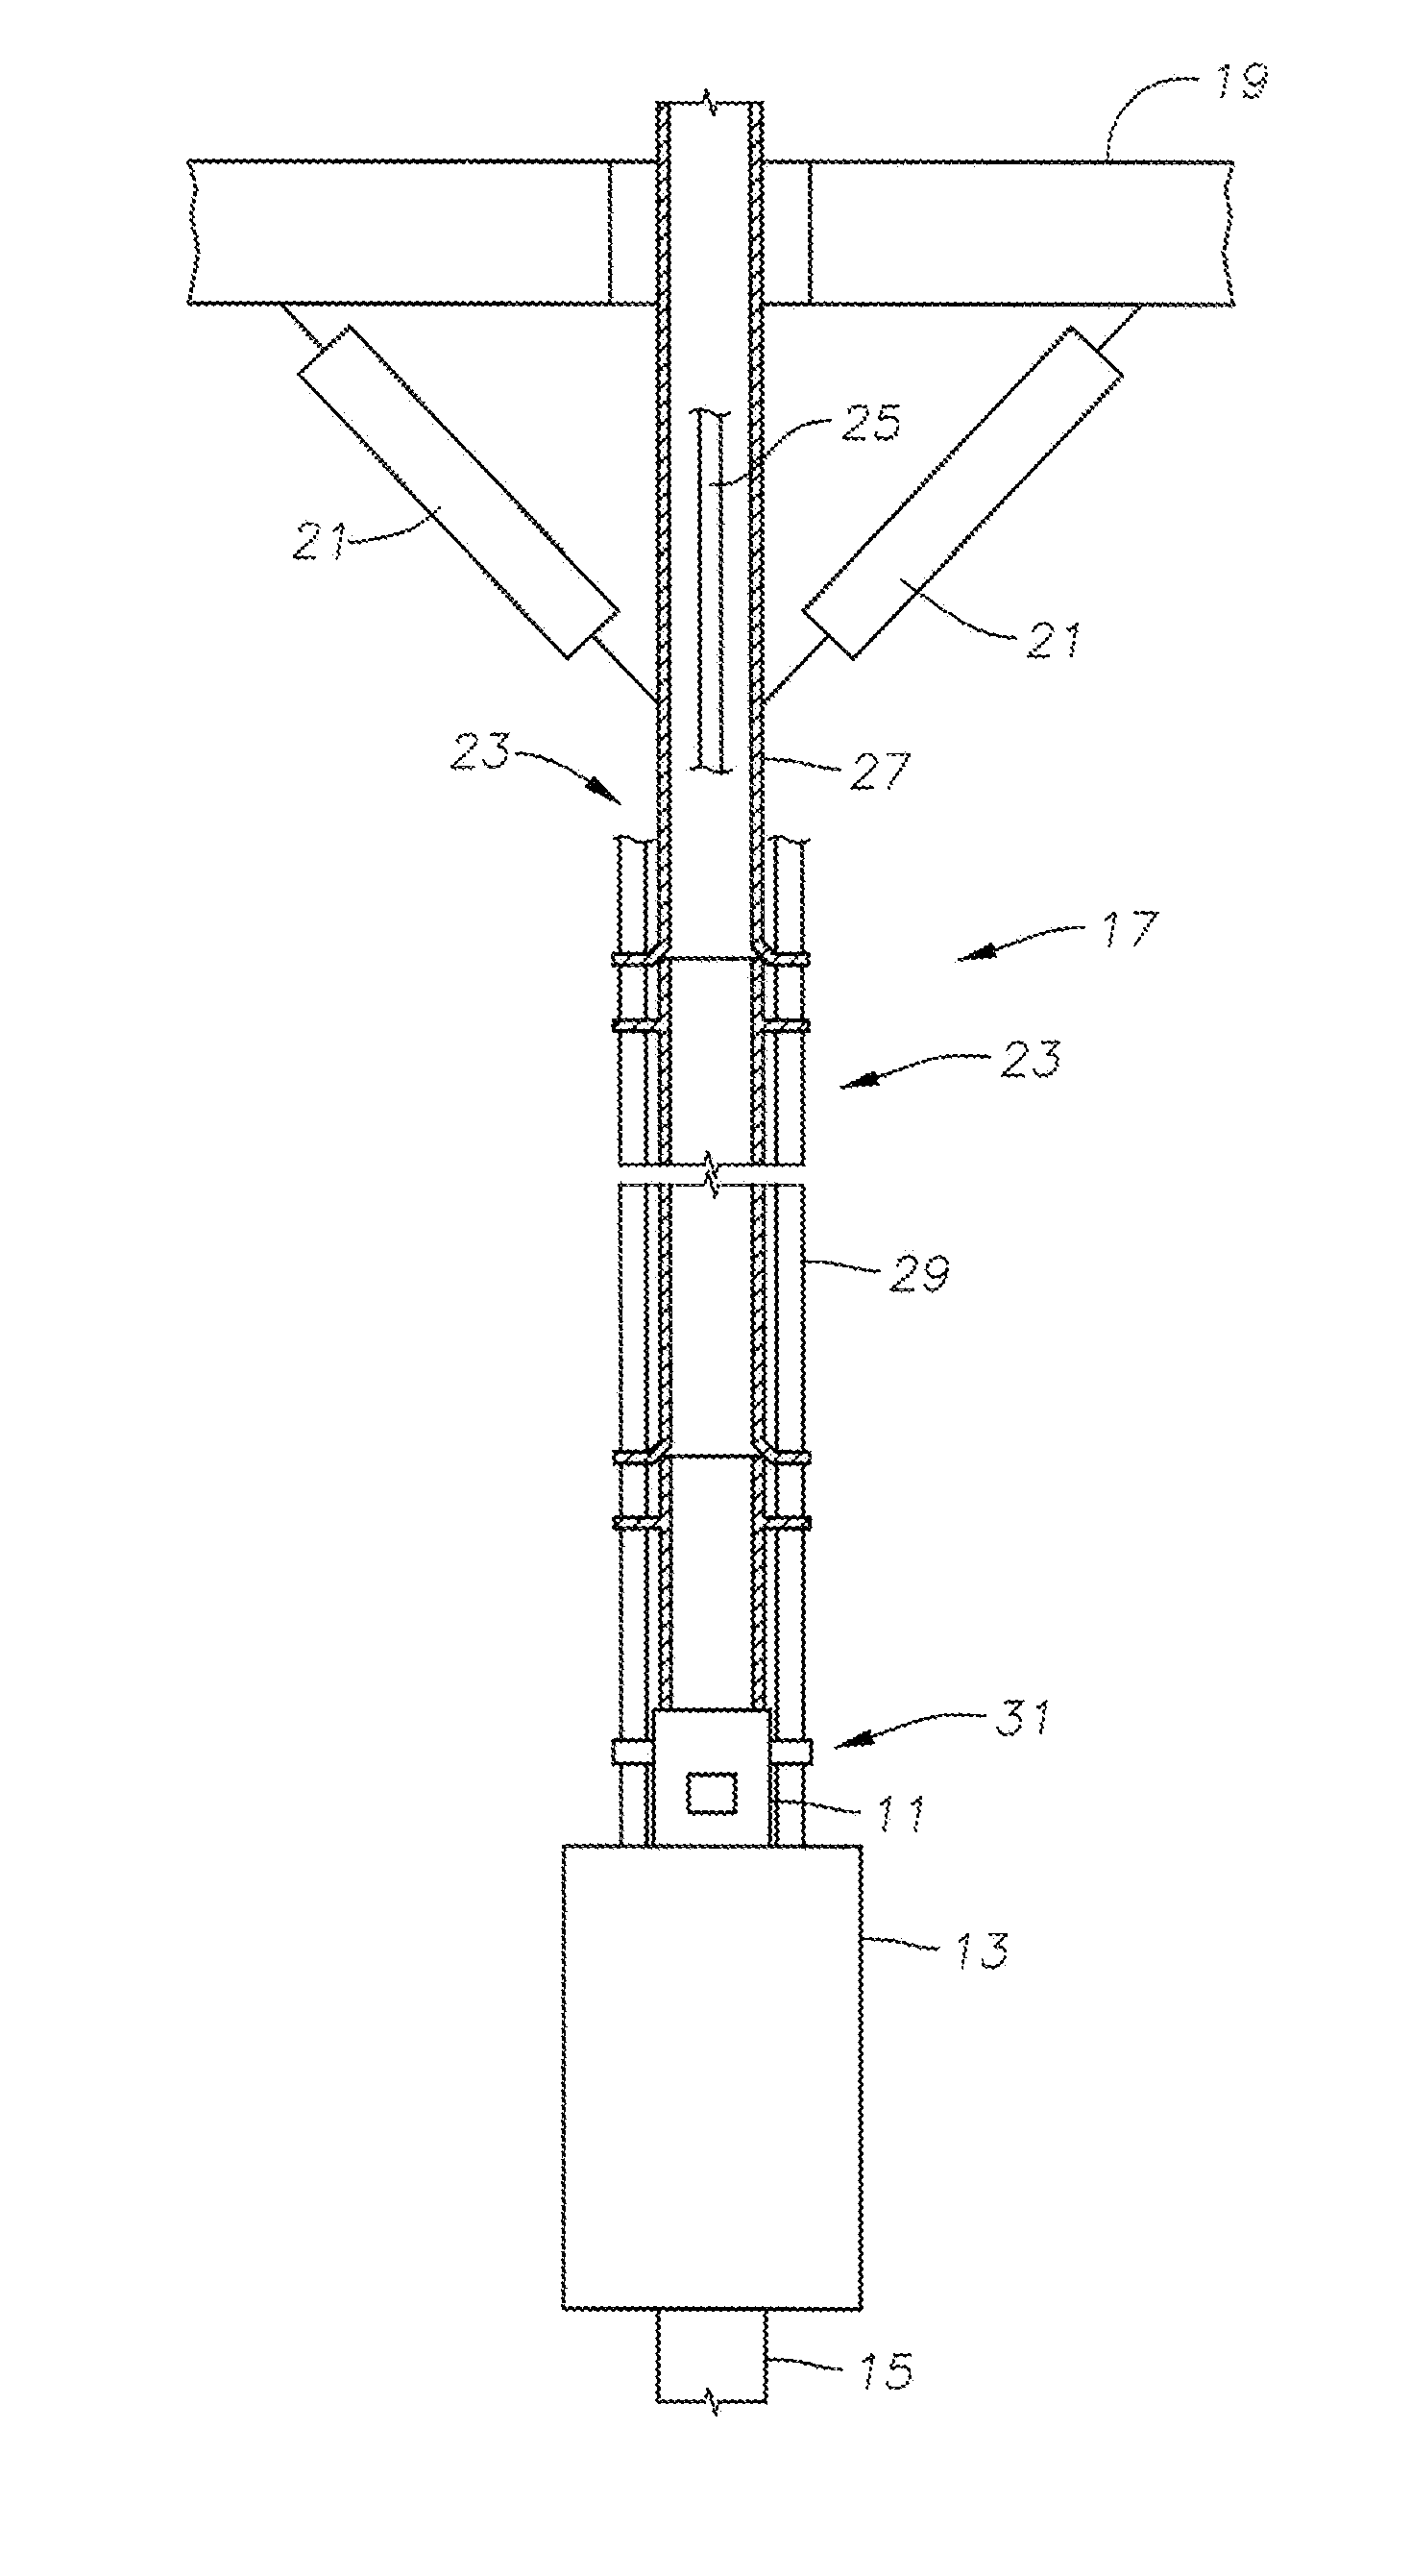 Drilling Riser Adapter Connection with Subsea Functionality